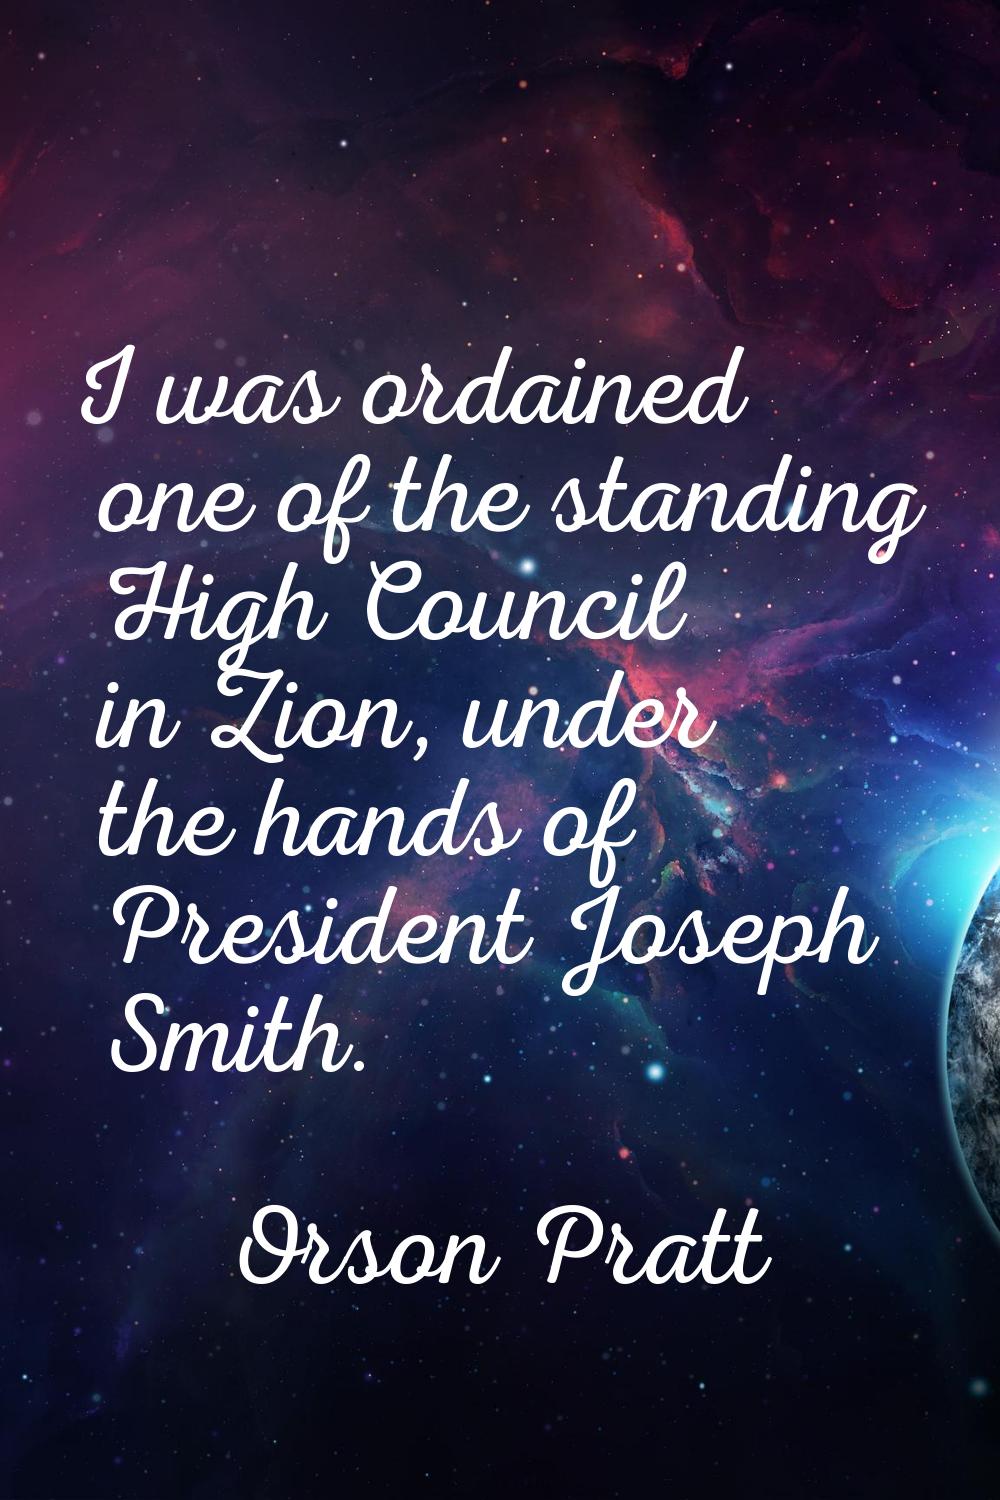 I was ordained one of the standing High Council in Zion, under the hands of President Joseph Smith.